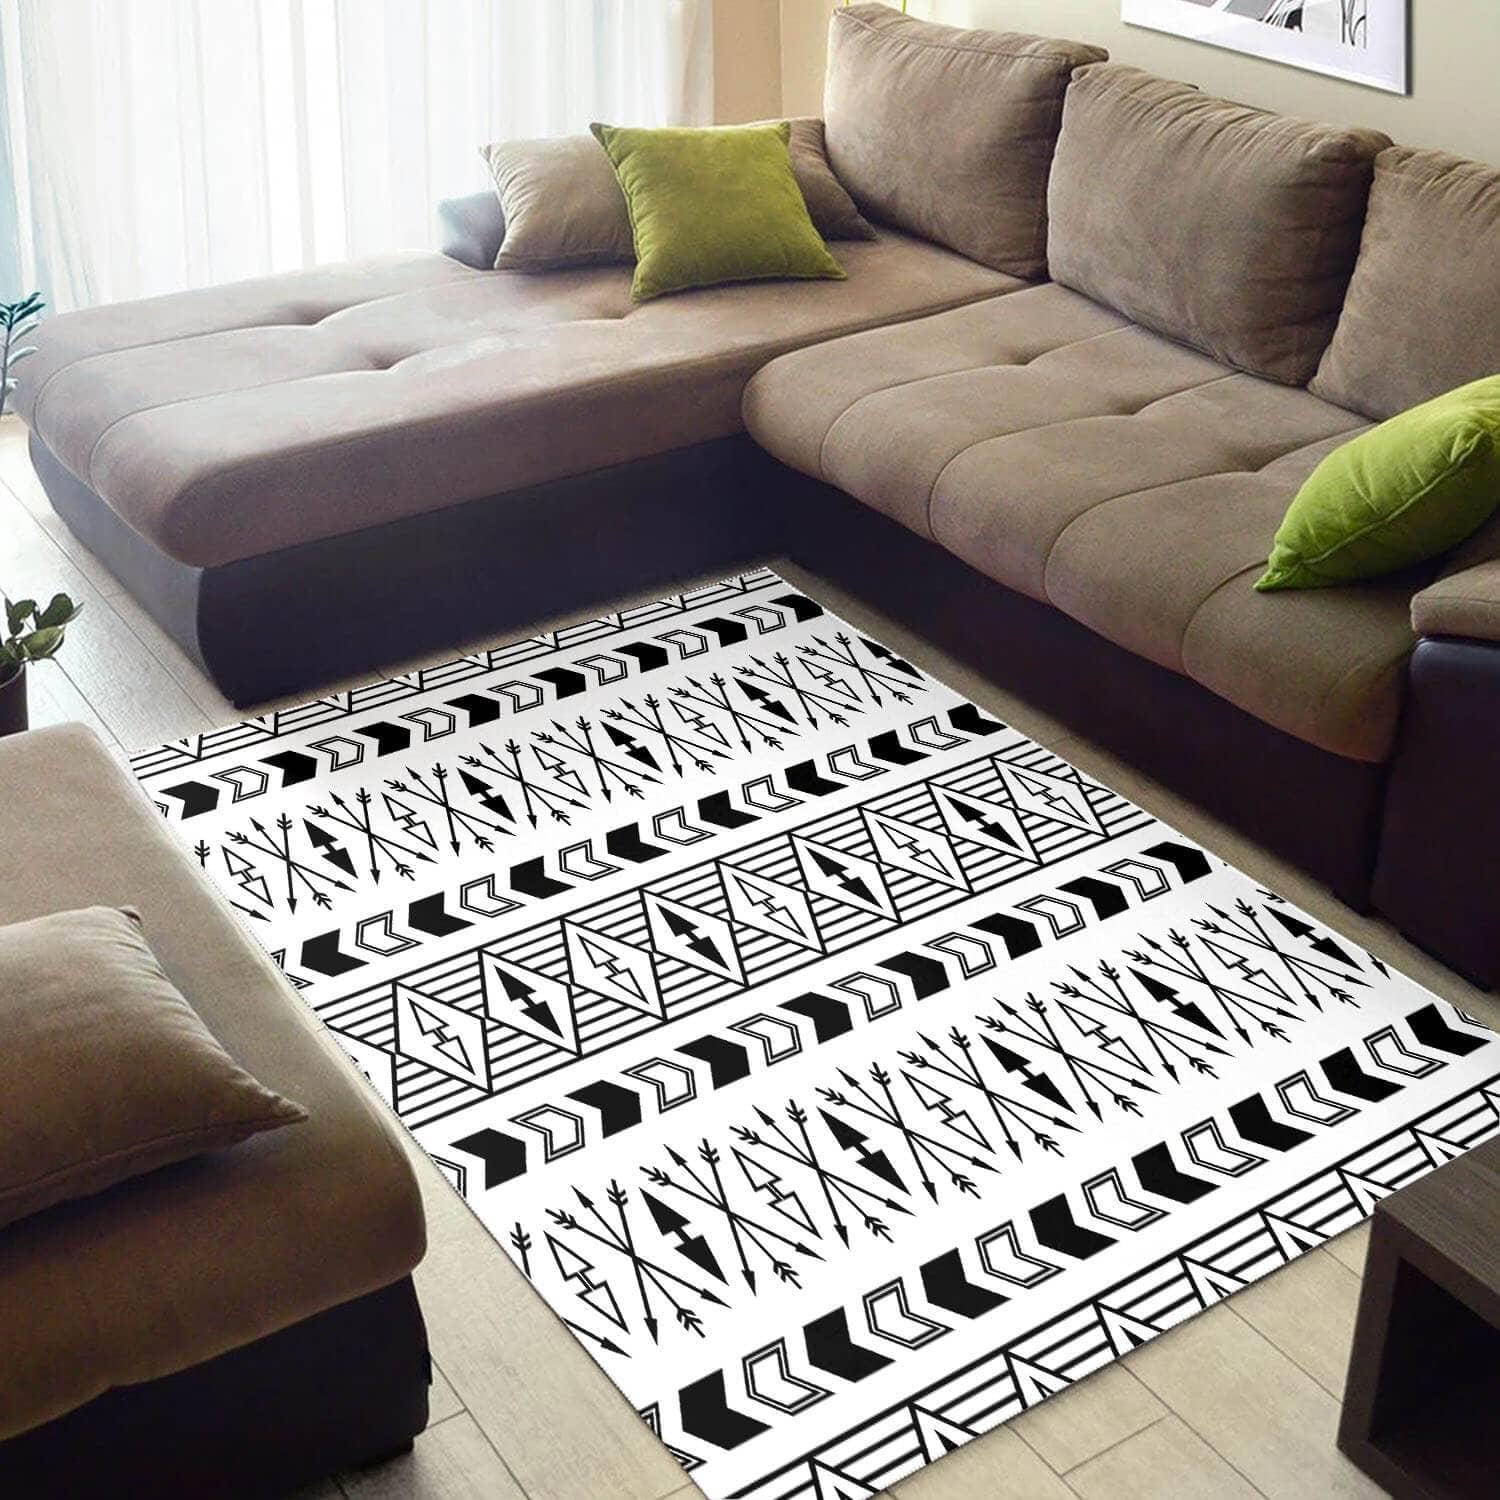 Cool African American Awesome Afrocentric Art Design Floor House Rug